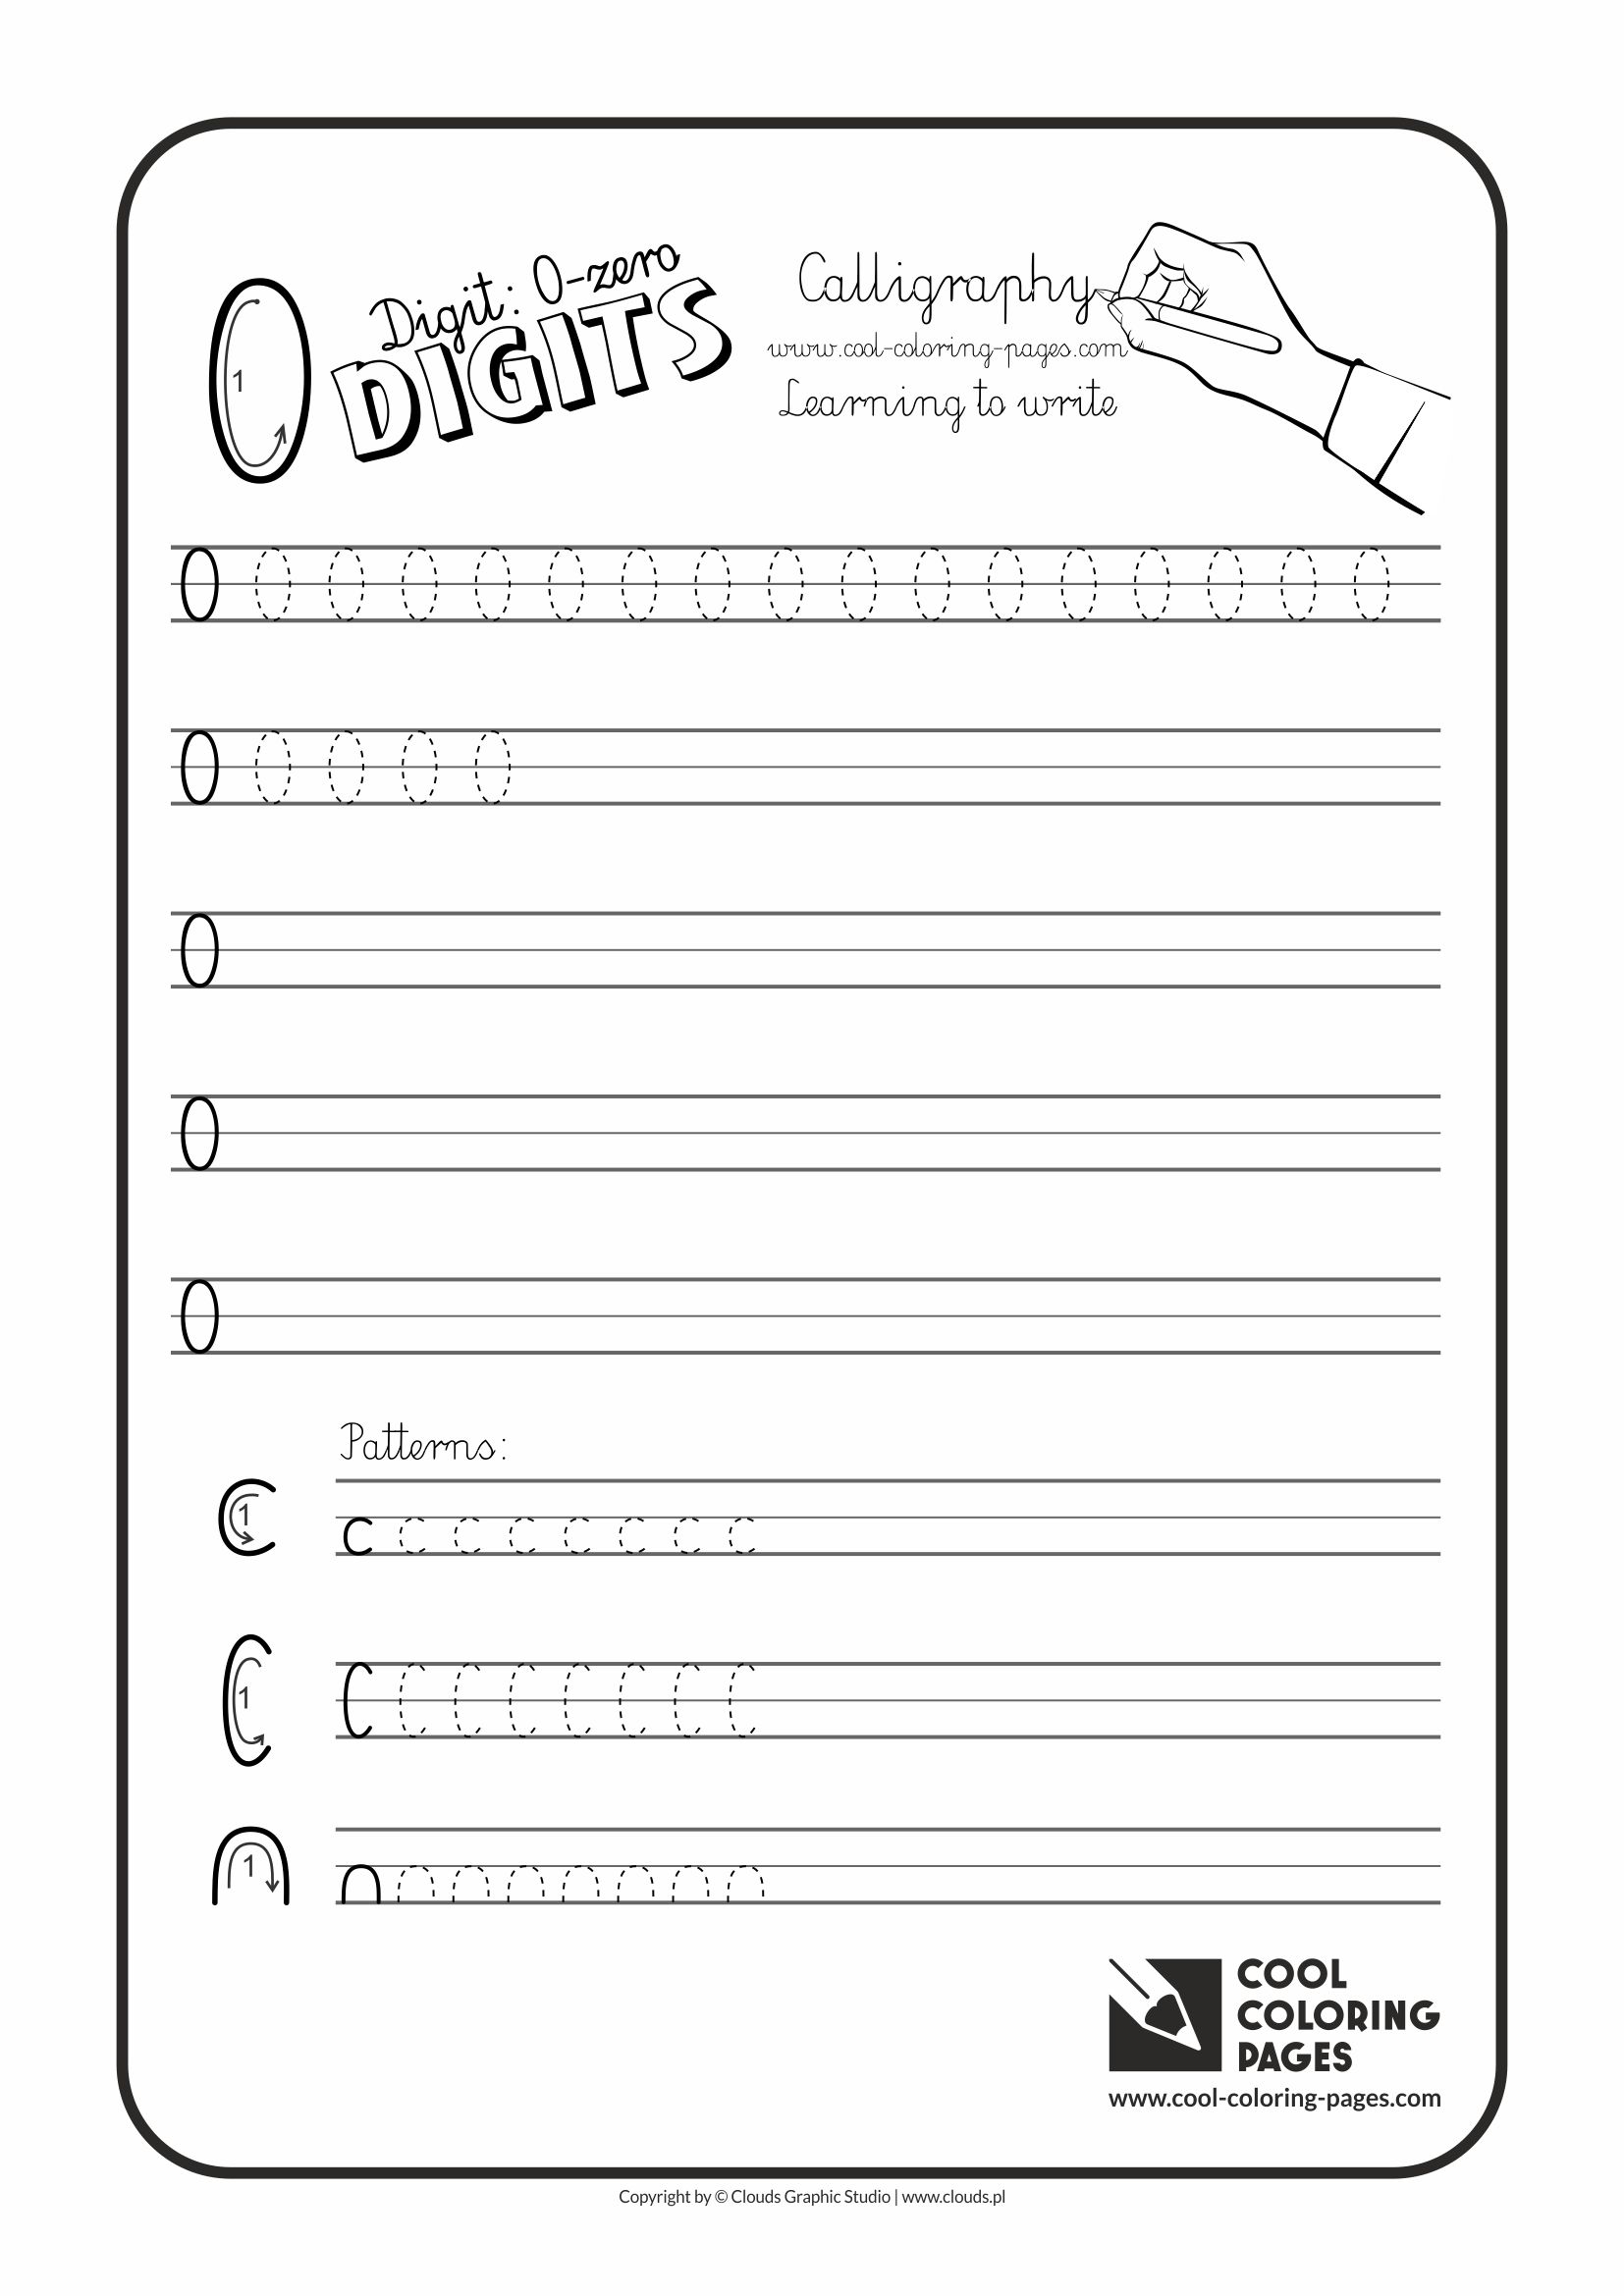 Cool Coloring Pages / Calligraphy / Digit 0 / Handwriting for kids